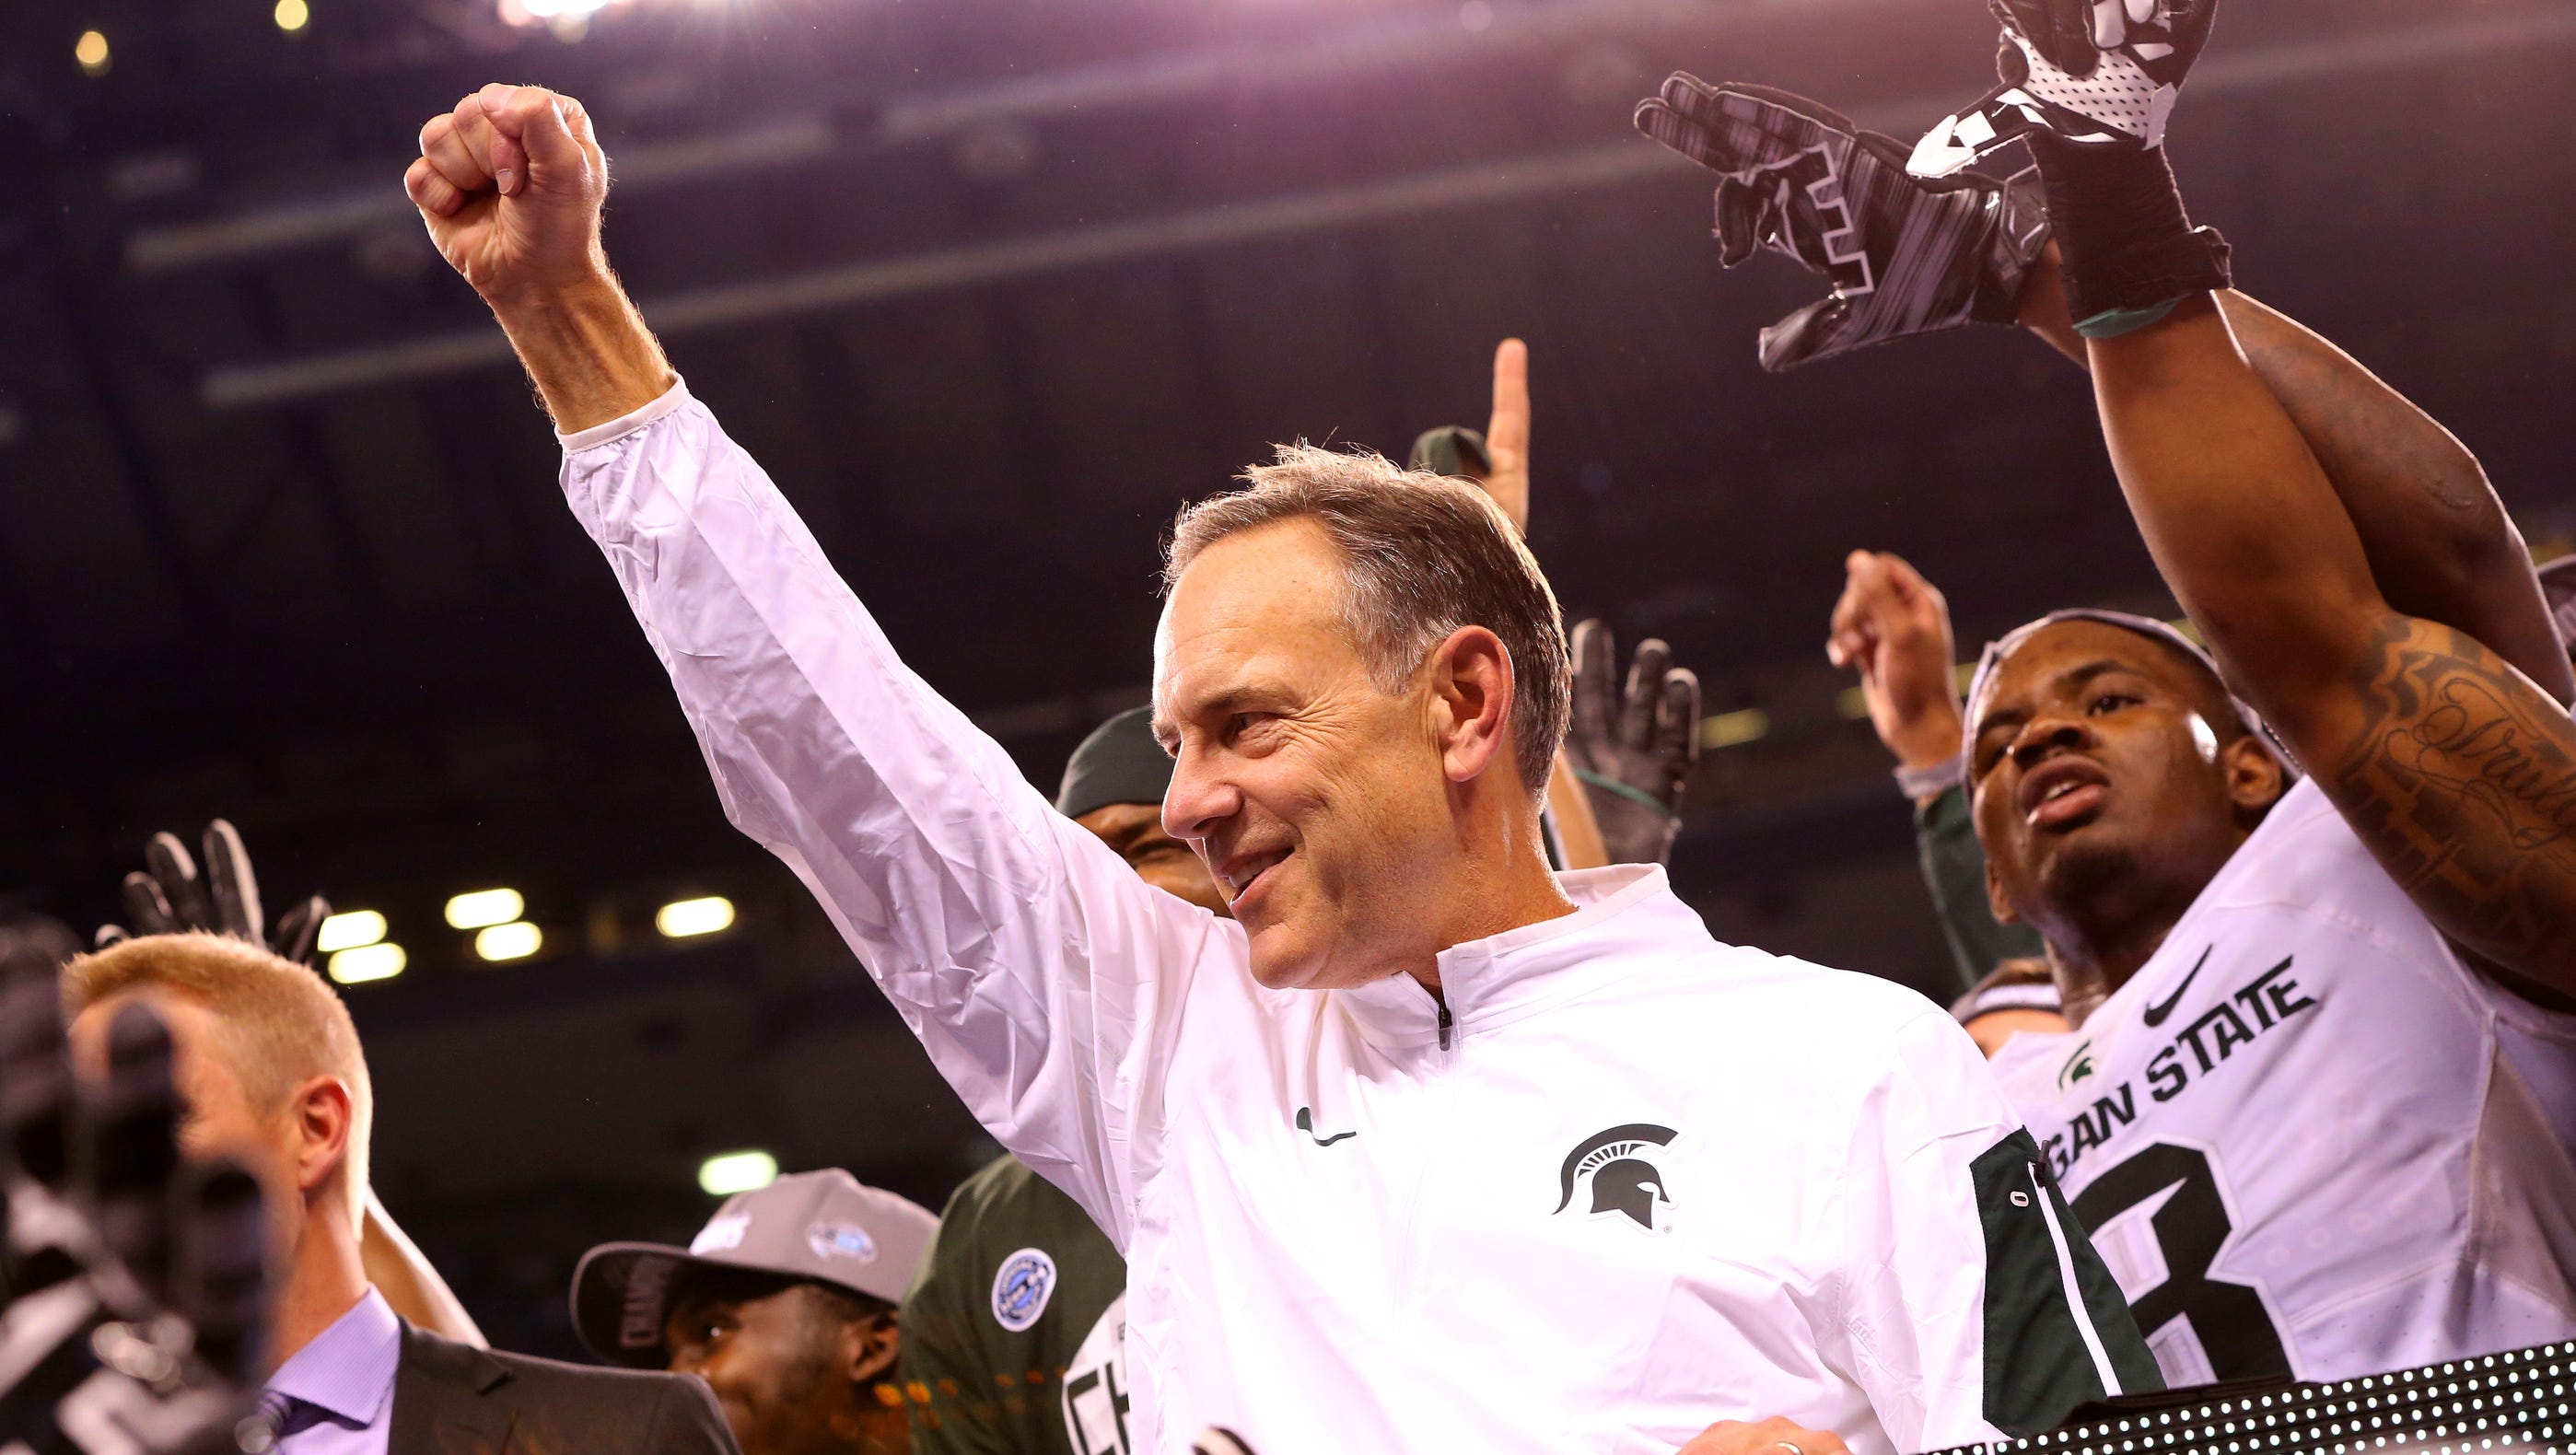 Michigan State head football coach Mark Dantonio steps on stage to receive the Amos Alonzo Stagg Championship Trophy after defeating Iowa in the Big Ten Championship Game at Lucas Oil Stadium on Dec. 5, 2015.